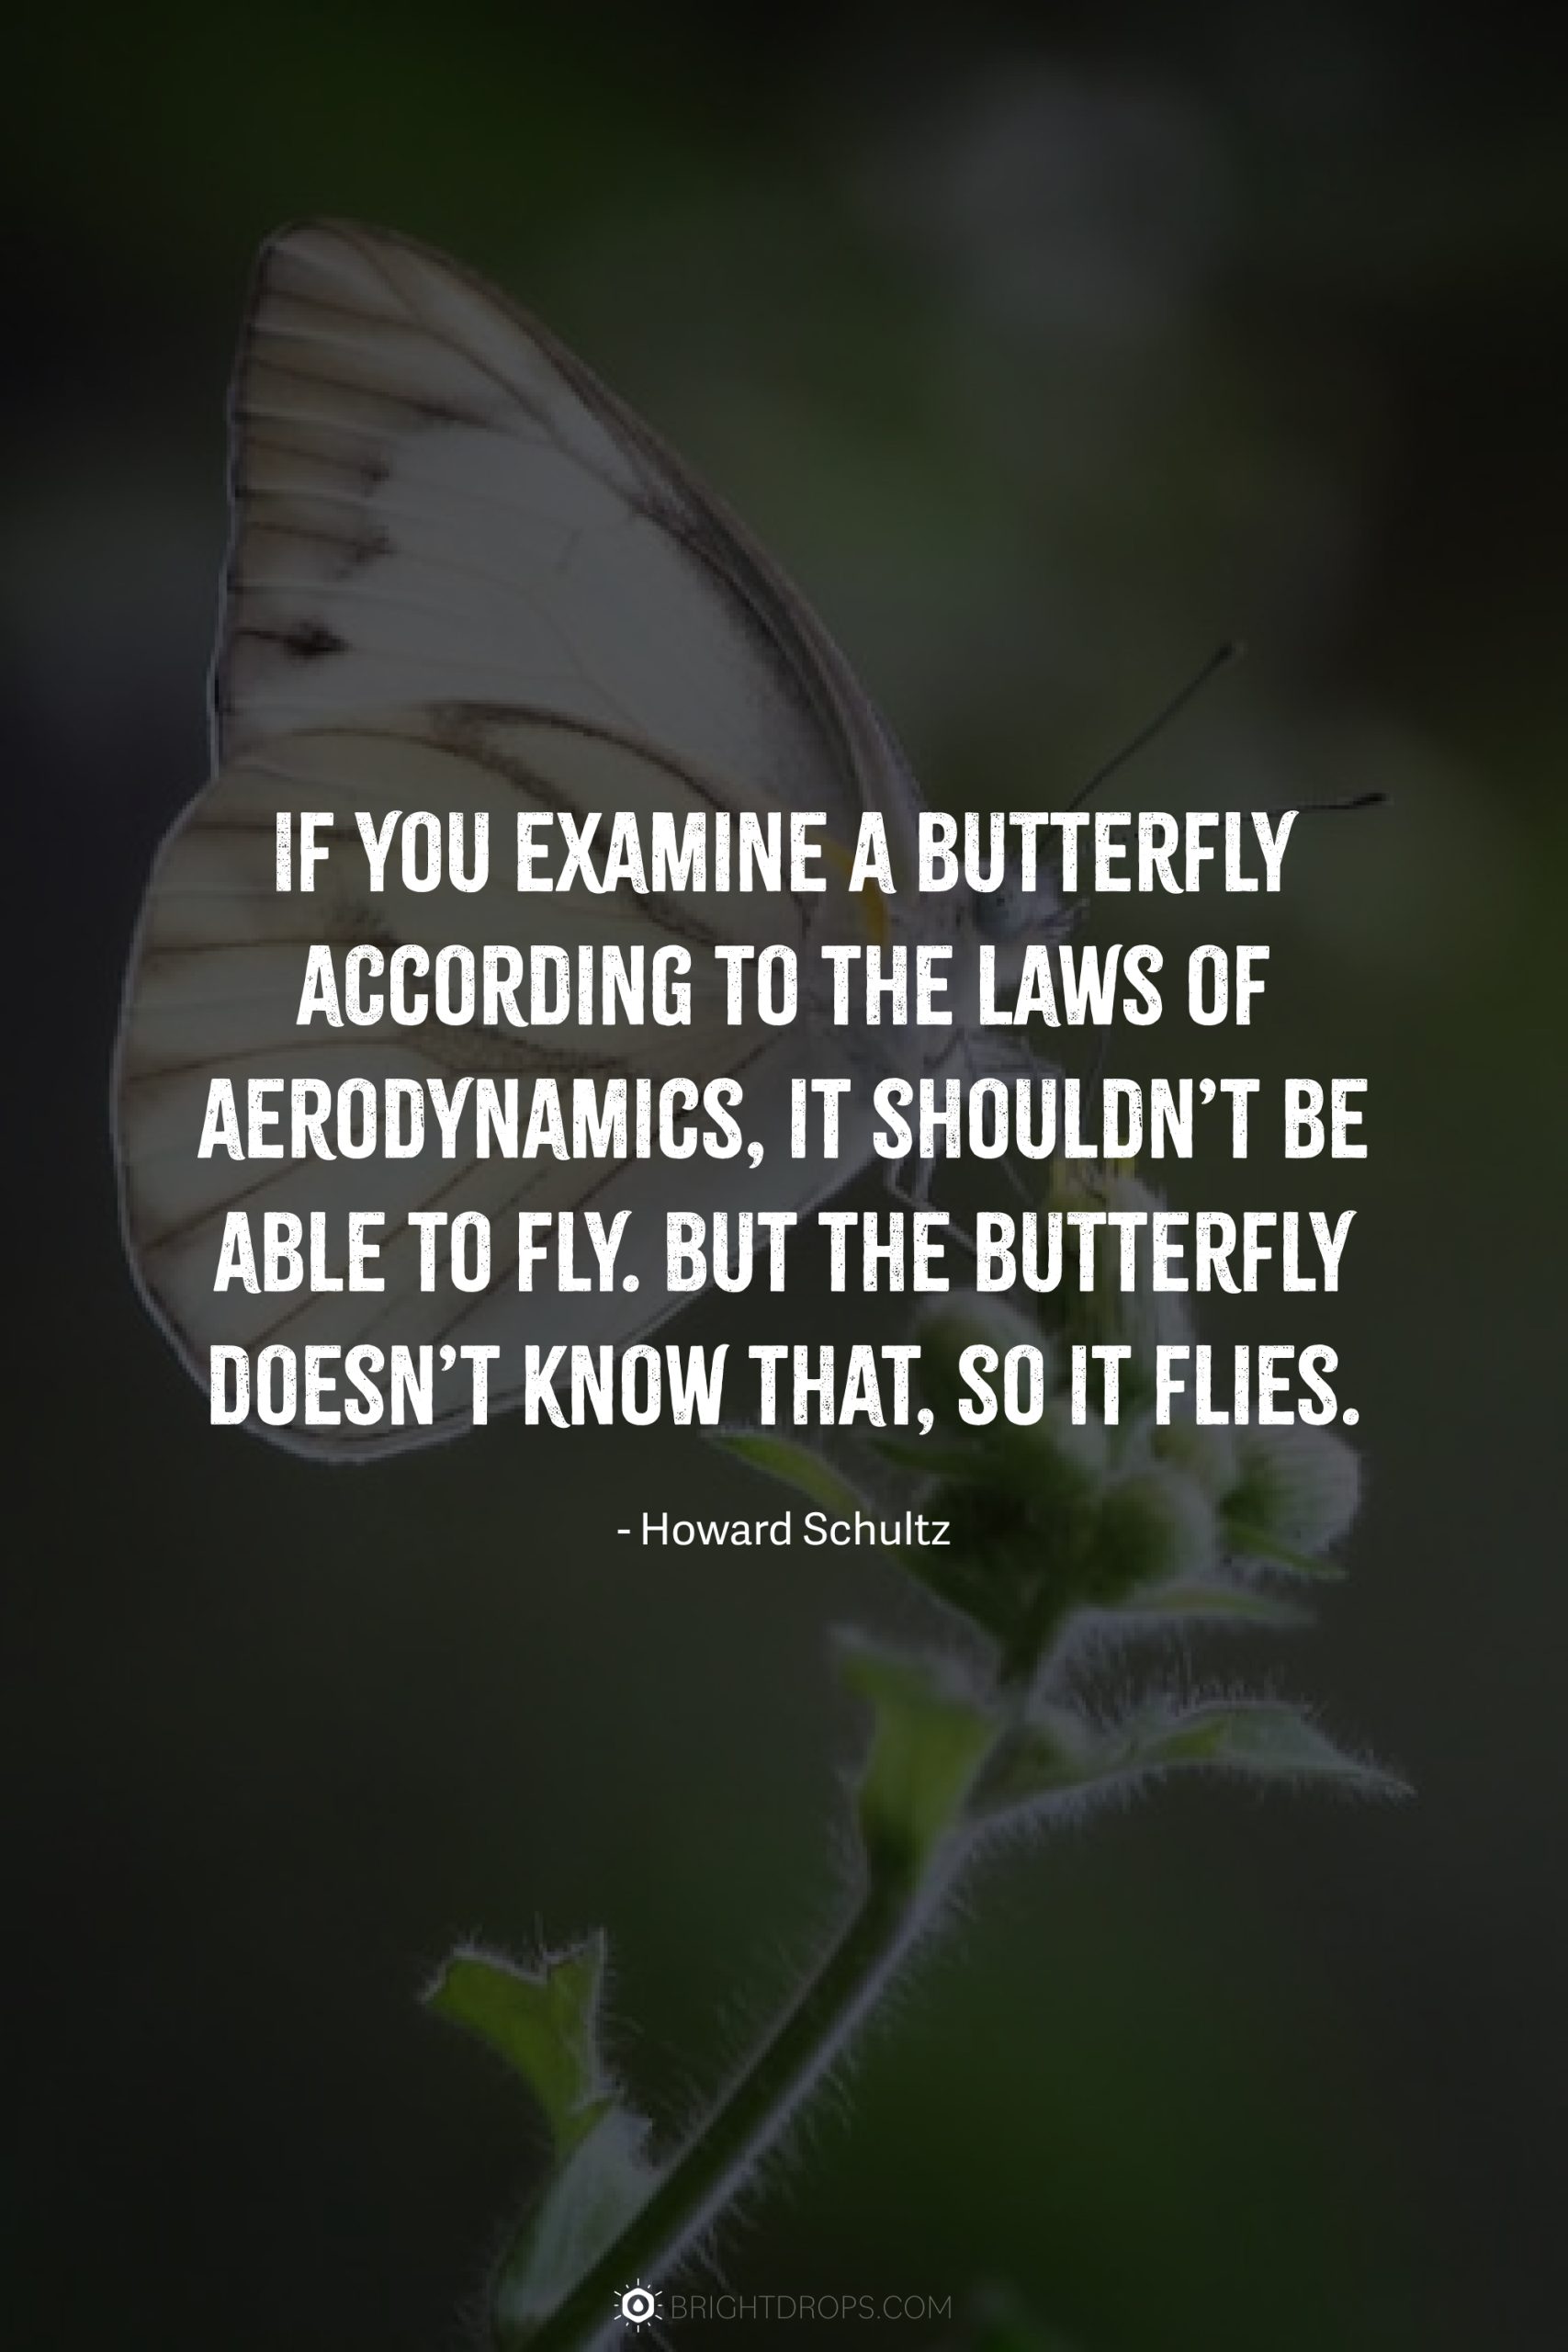 If you examine a butterfly according to the laws of aerodynamics, it shouldn’t be able to fly. But the butterfly doesn’t know that, so it flies.